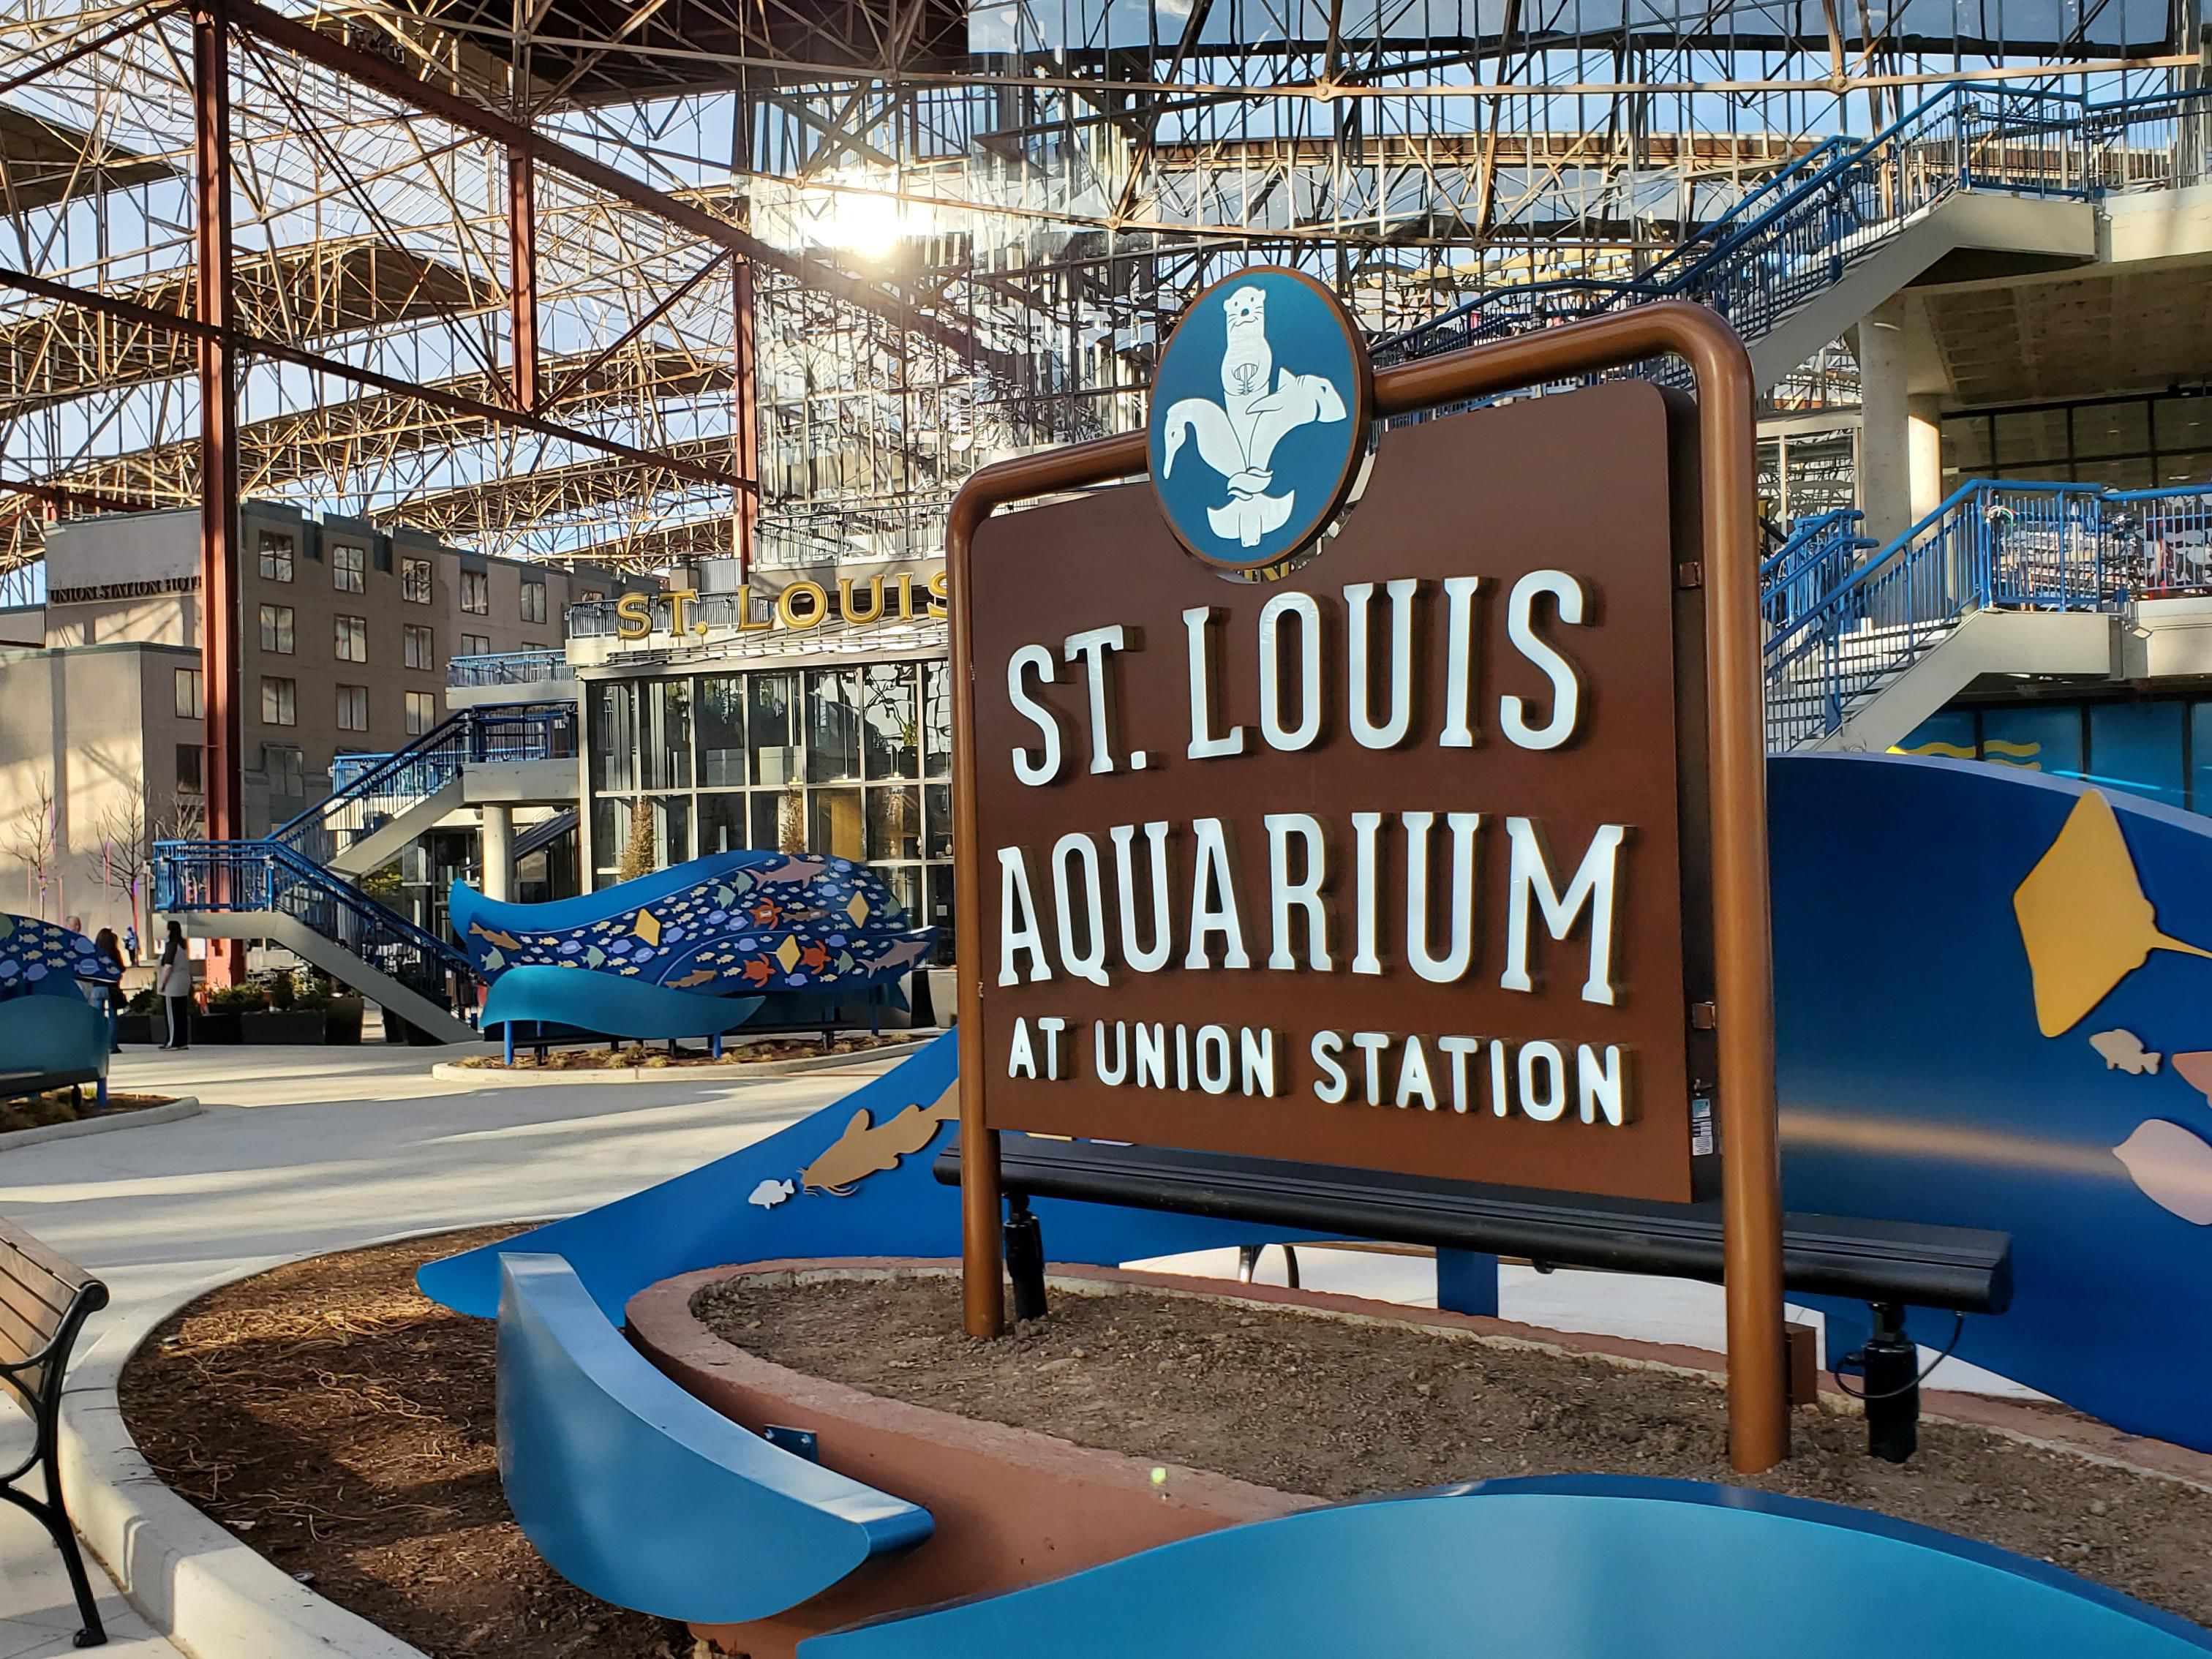 Planning a day at the St. Louis Aquarium at Union Station? Enjoy your stay with the Holiday Inn Downtown St. Louis, just 1 mile away from the Aquarium and close to many other St. Louis attractions! We have an indoor pool, restaurant and local shuttle. Tickets for Aquarium must be reserved in advance through their website. Book your stay today!